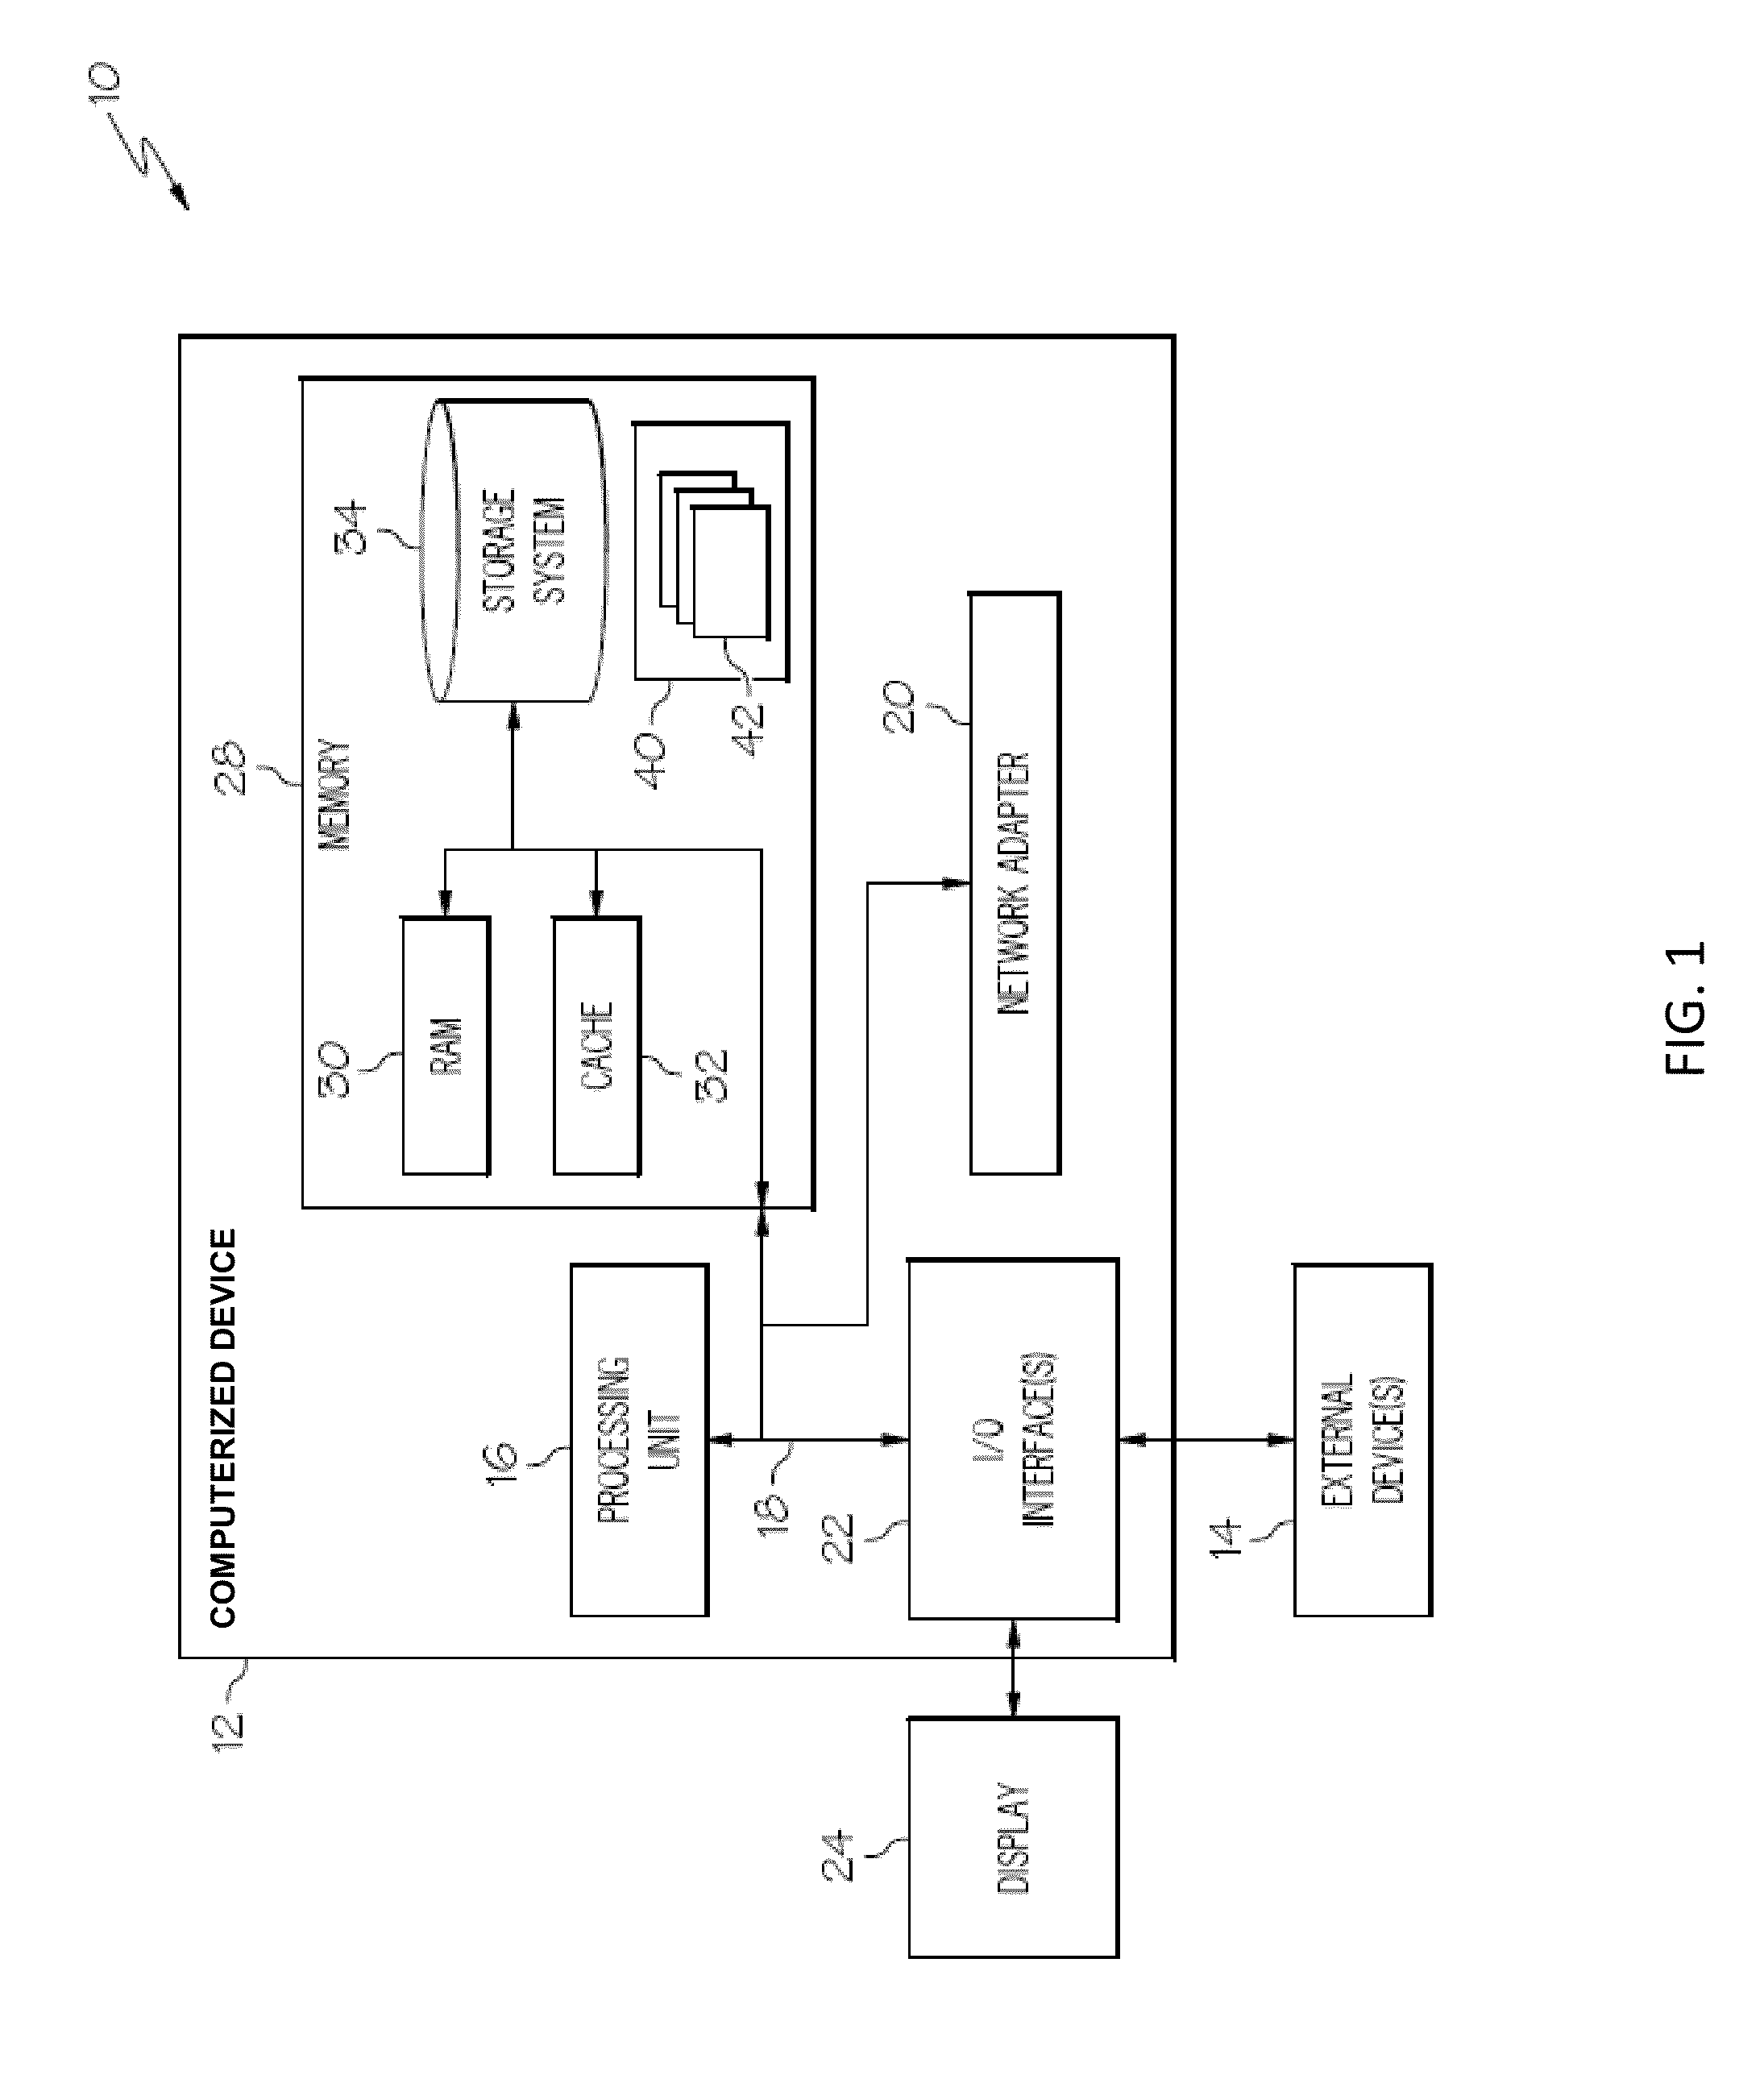 Graphical object-based user authentication for computerized devices